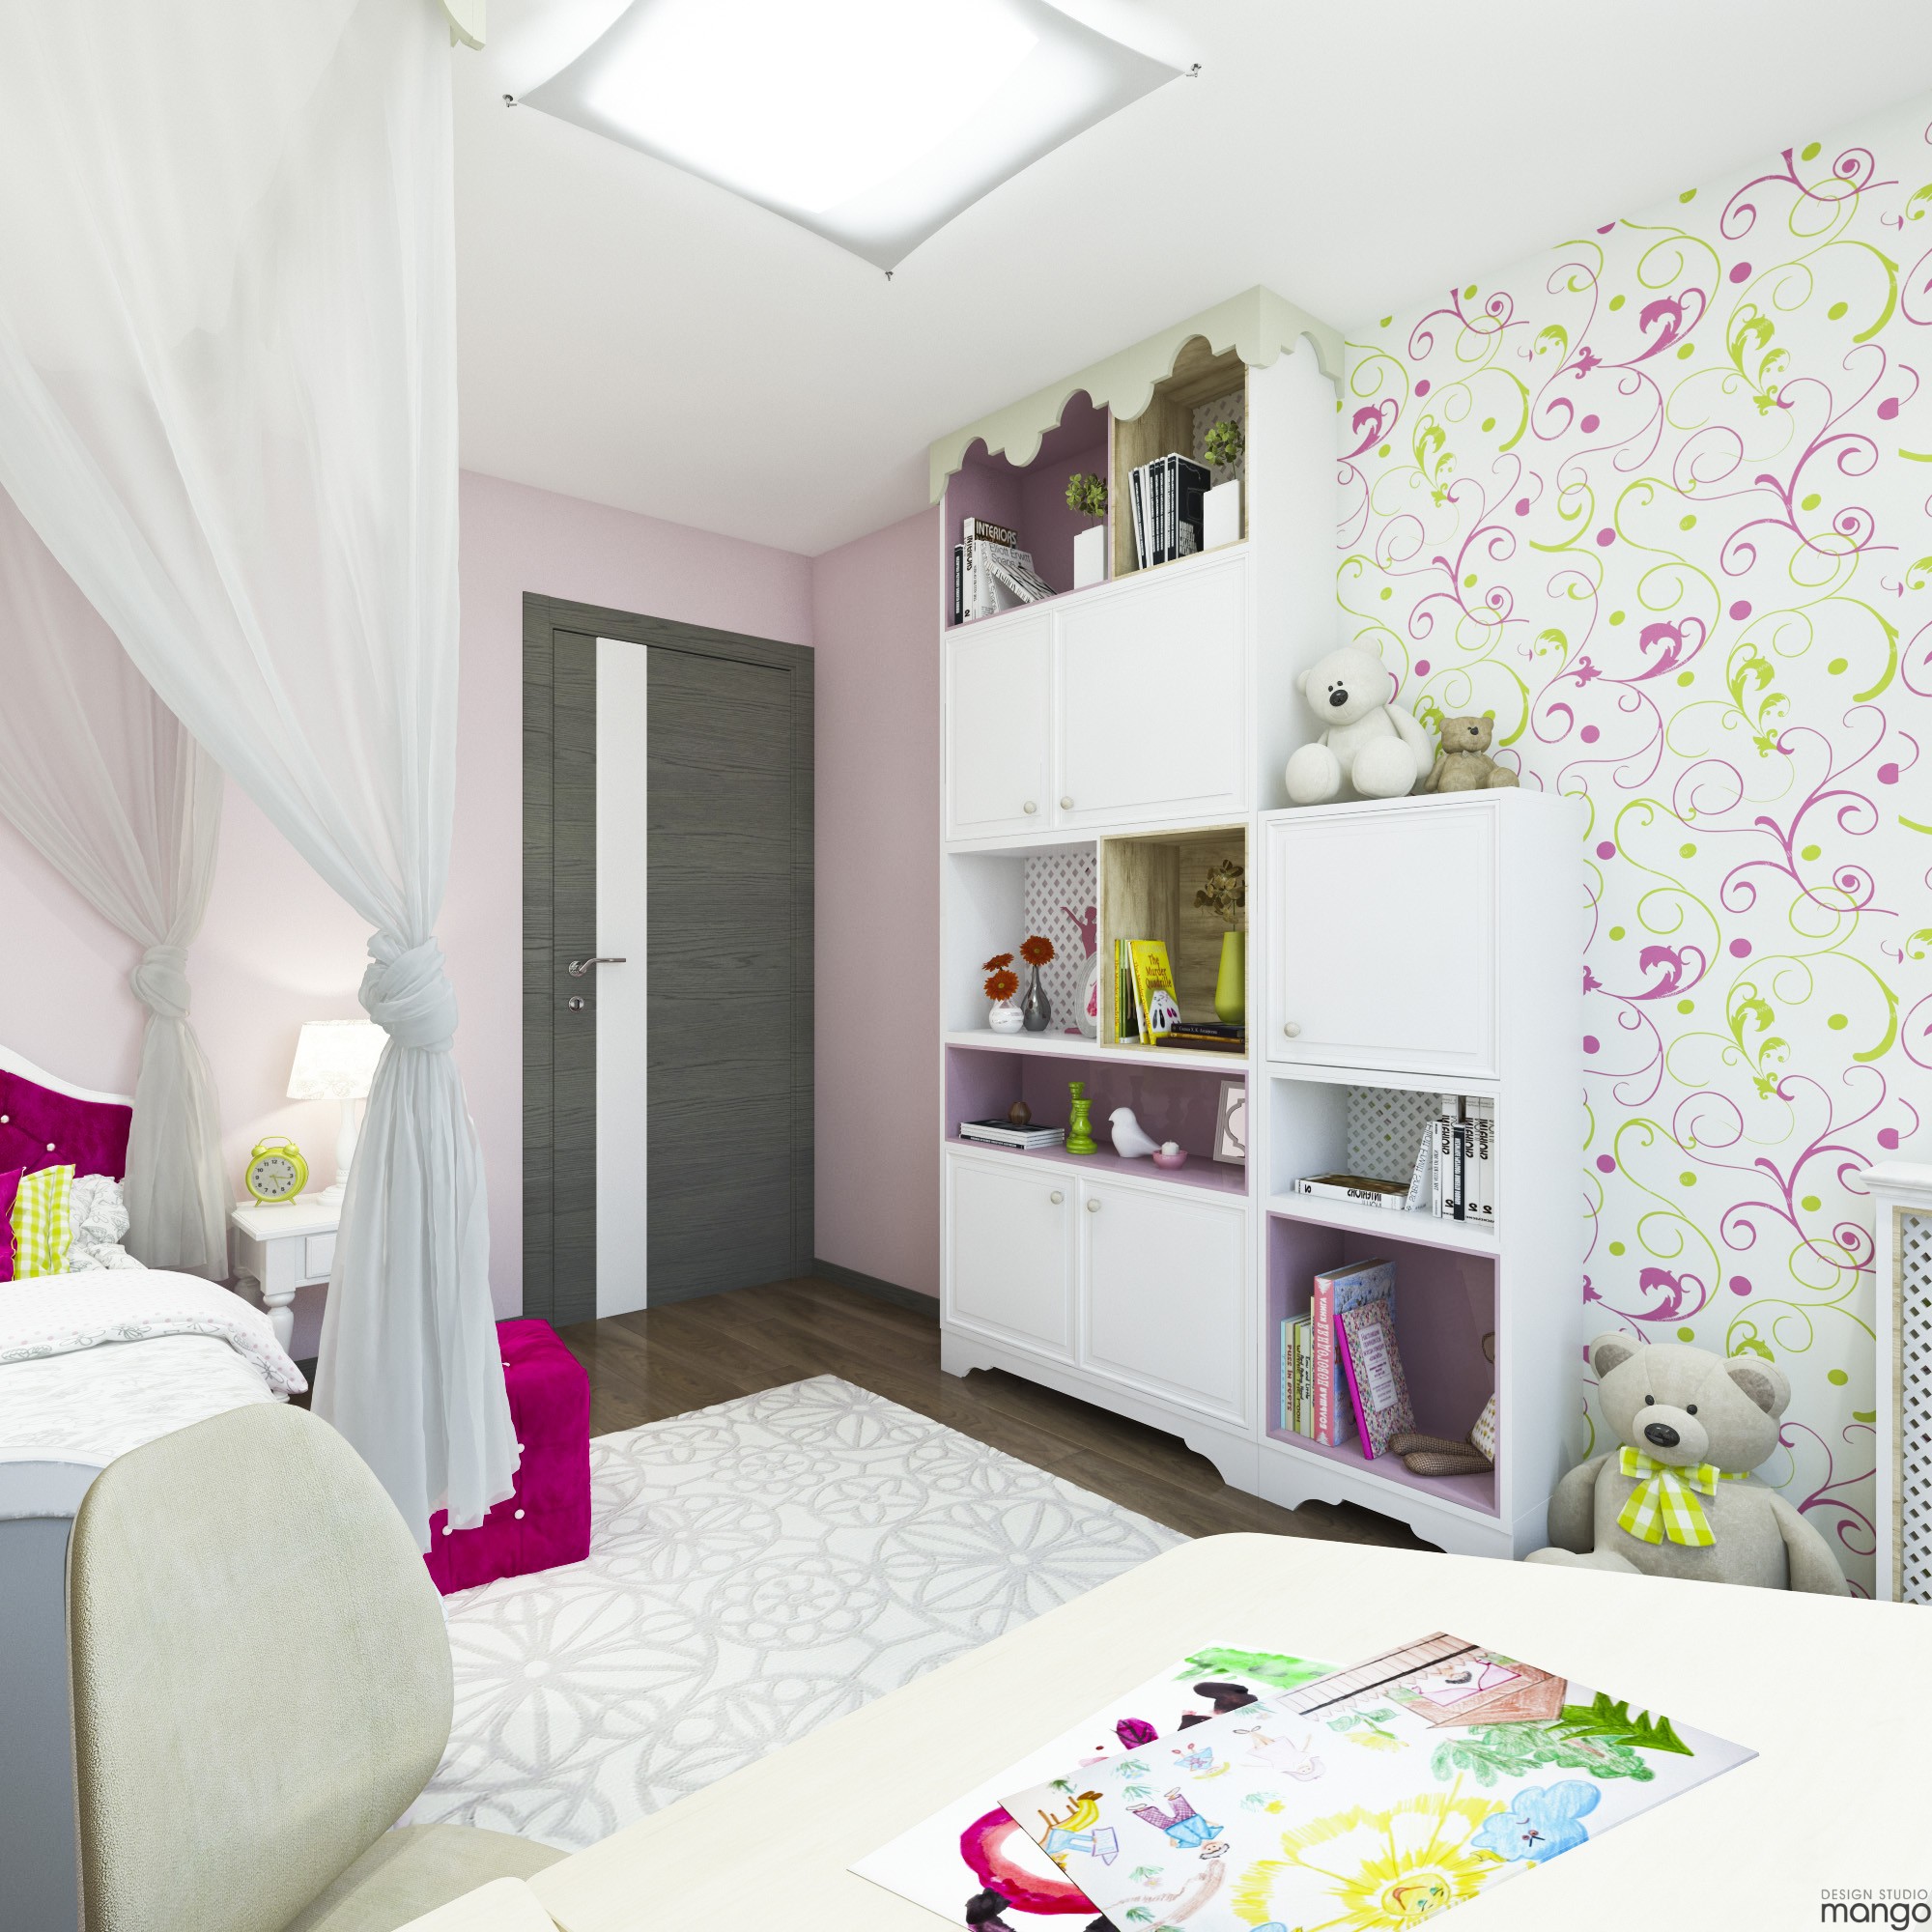 pinky room design ideas "width =" 2000 "height =" 2000 "srcset =" https://mileray.com/wp-content/uploads/2020/05/1588508404_803_Tips-How-To-Arrange-Kids-Room-Decor-With-Variety-of.jpg 2000w, https: / /mileray.com/wp-content/uploads/2016/11/Design-Studio-Mango1-5-150x150.jpg 150w, https://mileray.com/wp-content/uploads/2016/11/Design-Studio- Mango1-5-300x300.jpg 300w, https://mileray.com/wp-content/uploads/2016/11/Design-Studio-Mango1-5-768x768.jpg 768w, https://mileray.com/wp- content / uploads / 2016/11 / Design-Studio-Mango1-5-1024x1024.jpg 1024w, https://mileray.com/wp-content/uploads/2016/11/Design-Studio-Mango1-5-696x696.jpg 696w, https://mileray.com/wp-content/uploads/2016/11/Design-Studio-Mango1-5-1068x1068.jpg 1068w, https://mileray.com/wp-content/uploads/2016/11 /Design-Studio-Mango1-5-420x420.jpg 420w "sizes =" (maximum width: 2000px) 100vw, 2000px